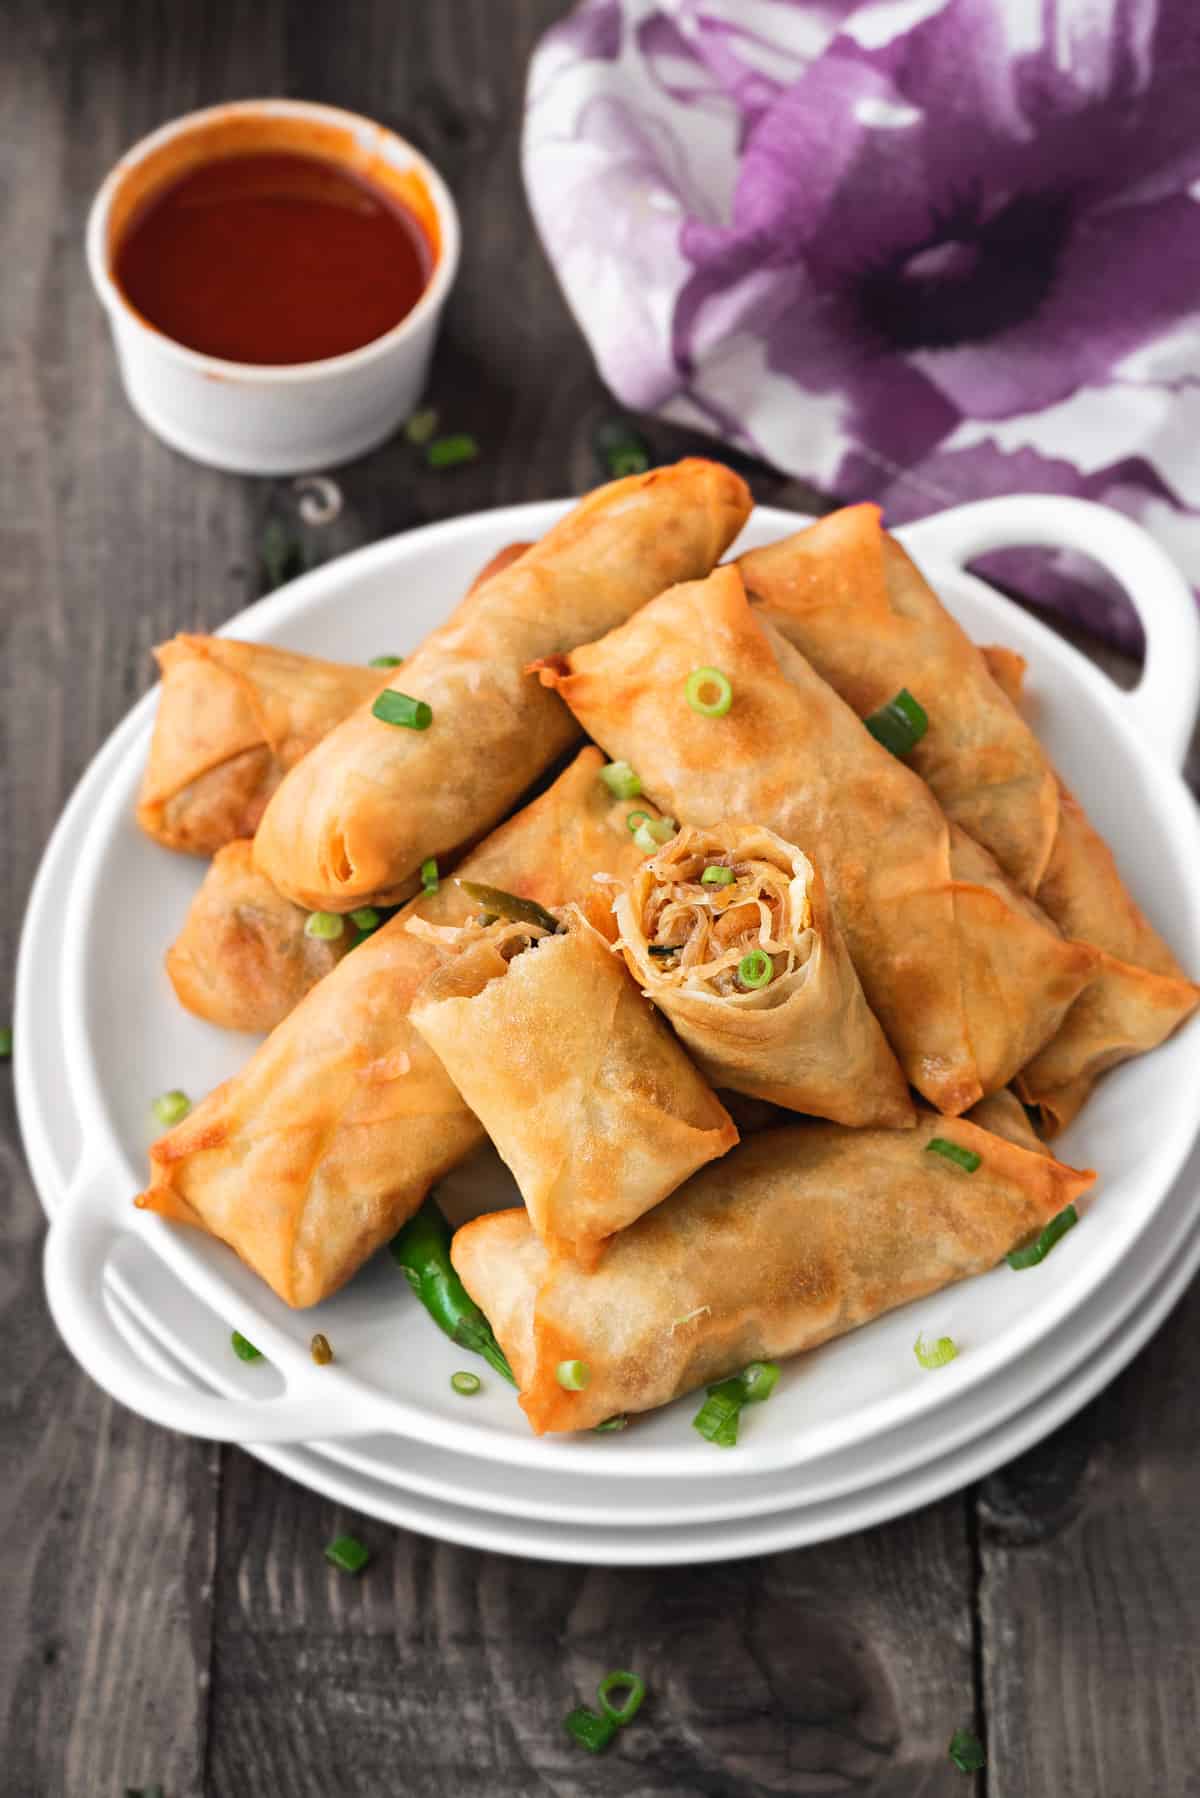 Pile of vegetable spring rolls on a white plate garnished with green onions